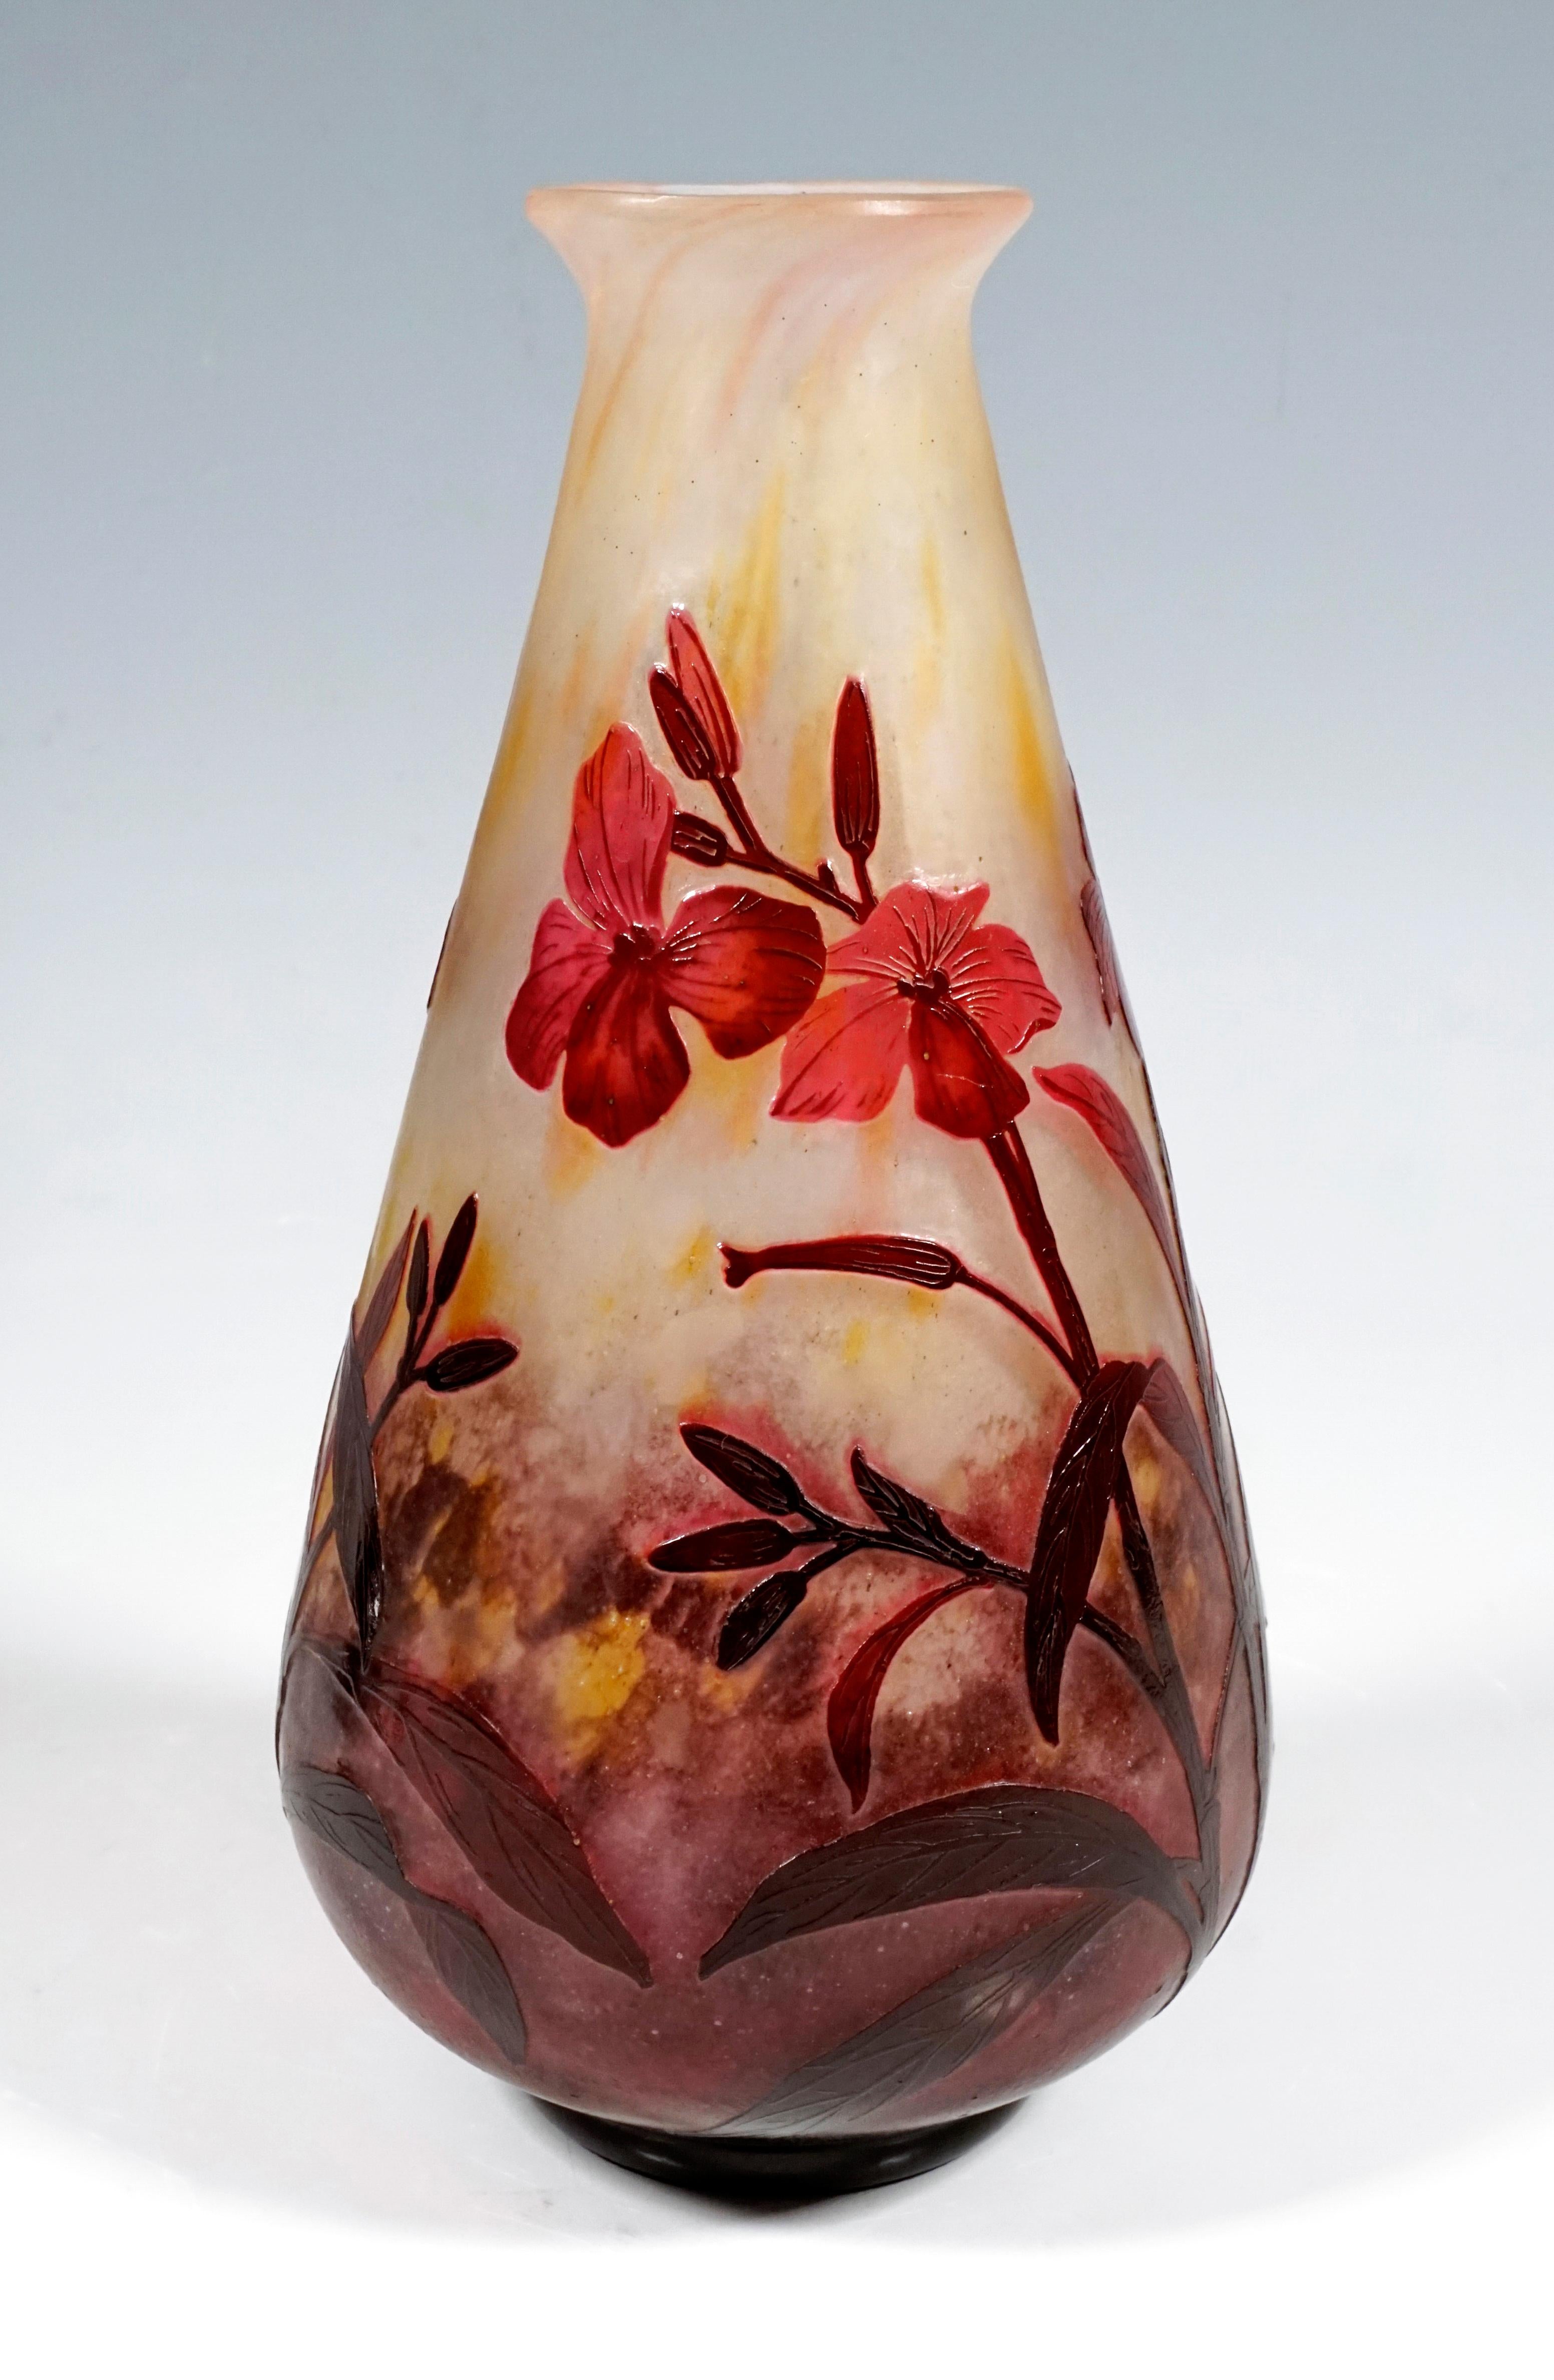 Conical shaped vase with flared, rounded mouth rim, colorless glass with flaky white, yellow and red-violet powder melts, burgundy-magenta-colored overlay, high-cut dames-wort flowers decor, satined surface in the background, relief signature 'DAUM